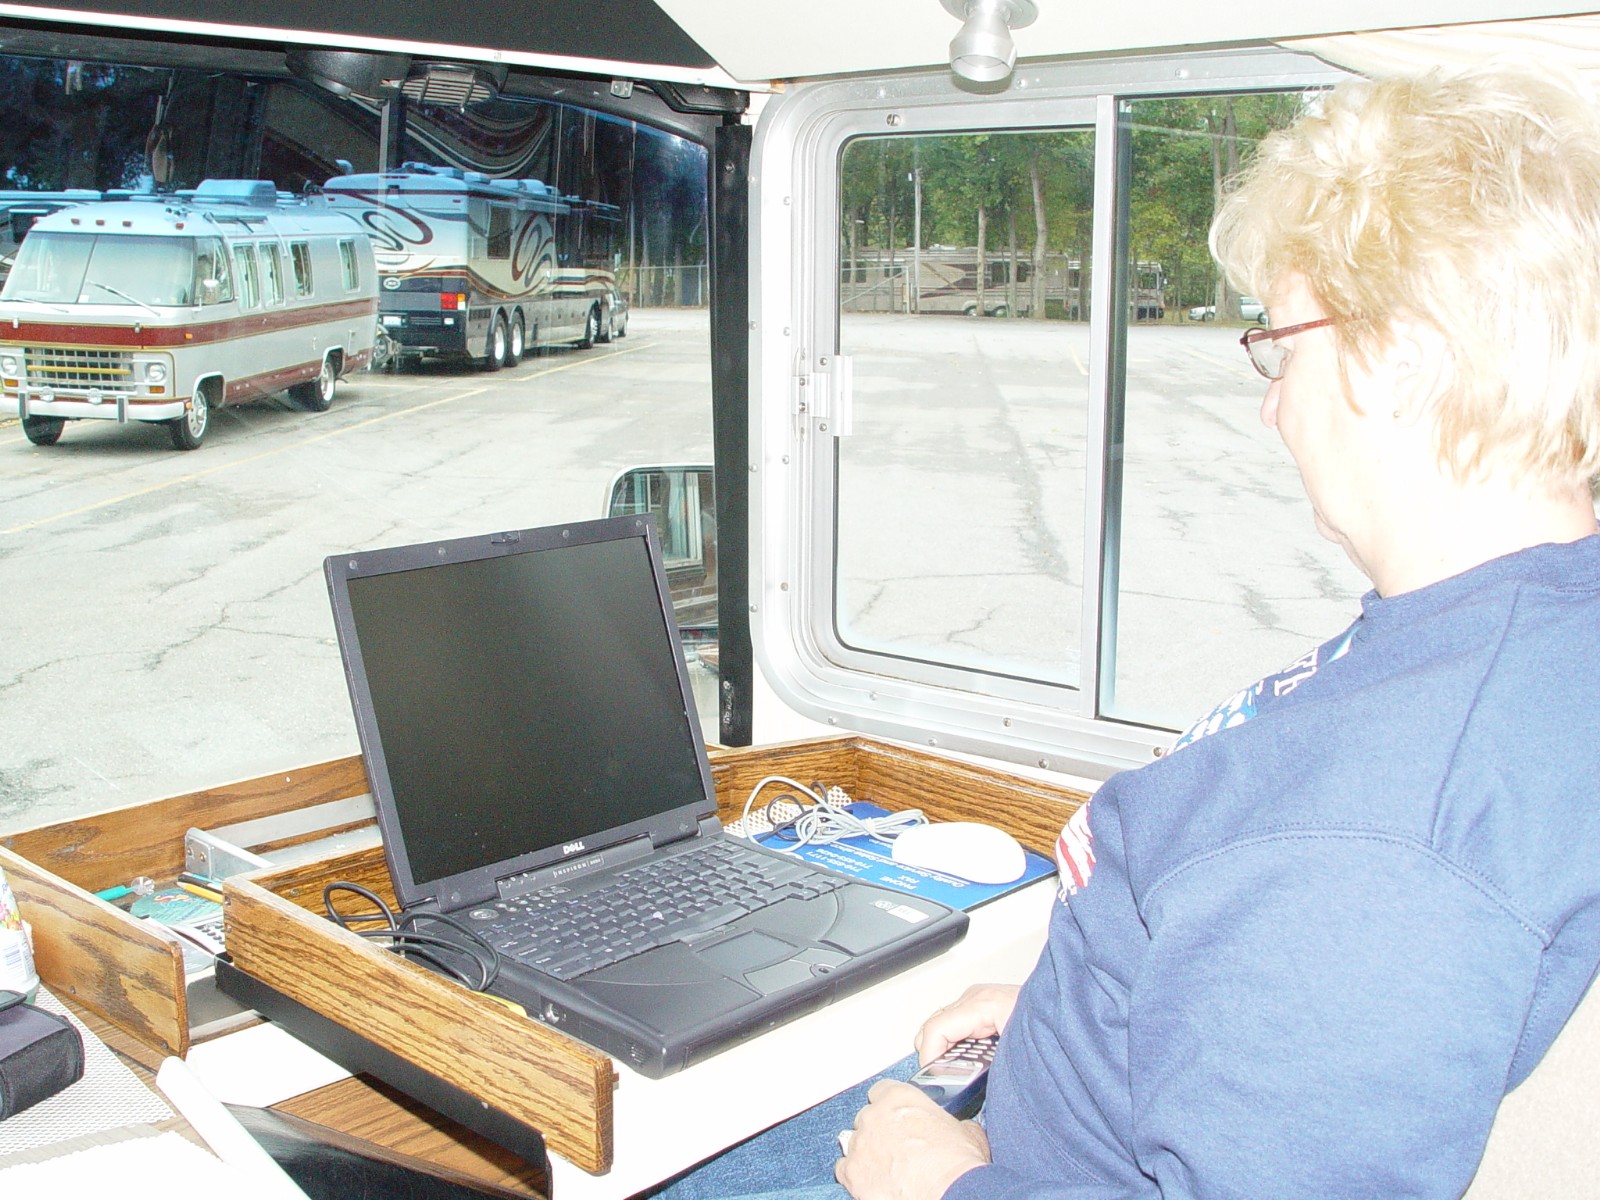 HERE CAROL PULLS THE COMPARTMENT OUT AND OPENS IT UP TO REVEAL THE LAPTOP, A REAL NEAT ADDITION.